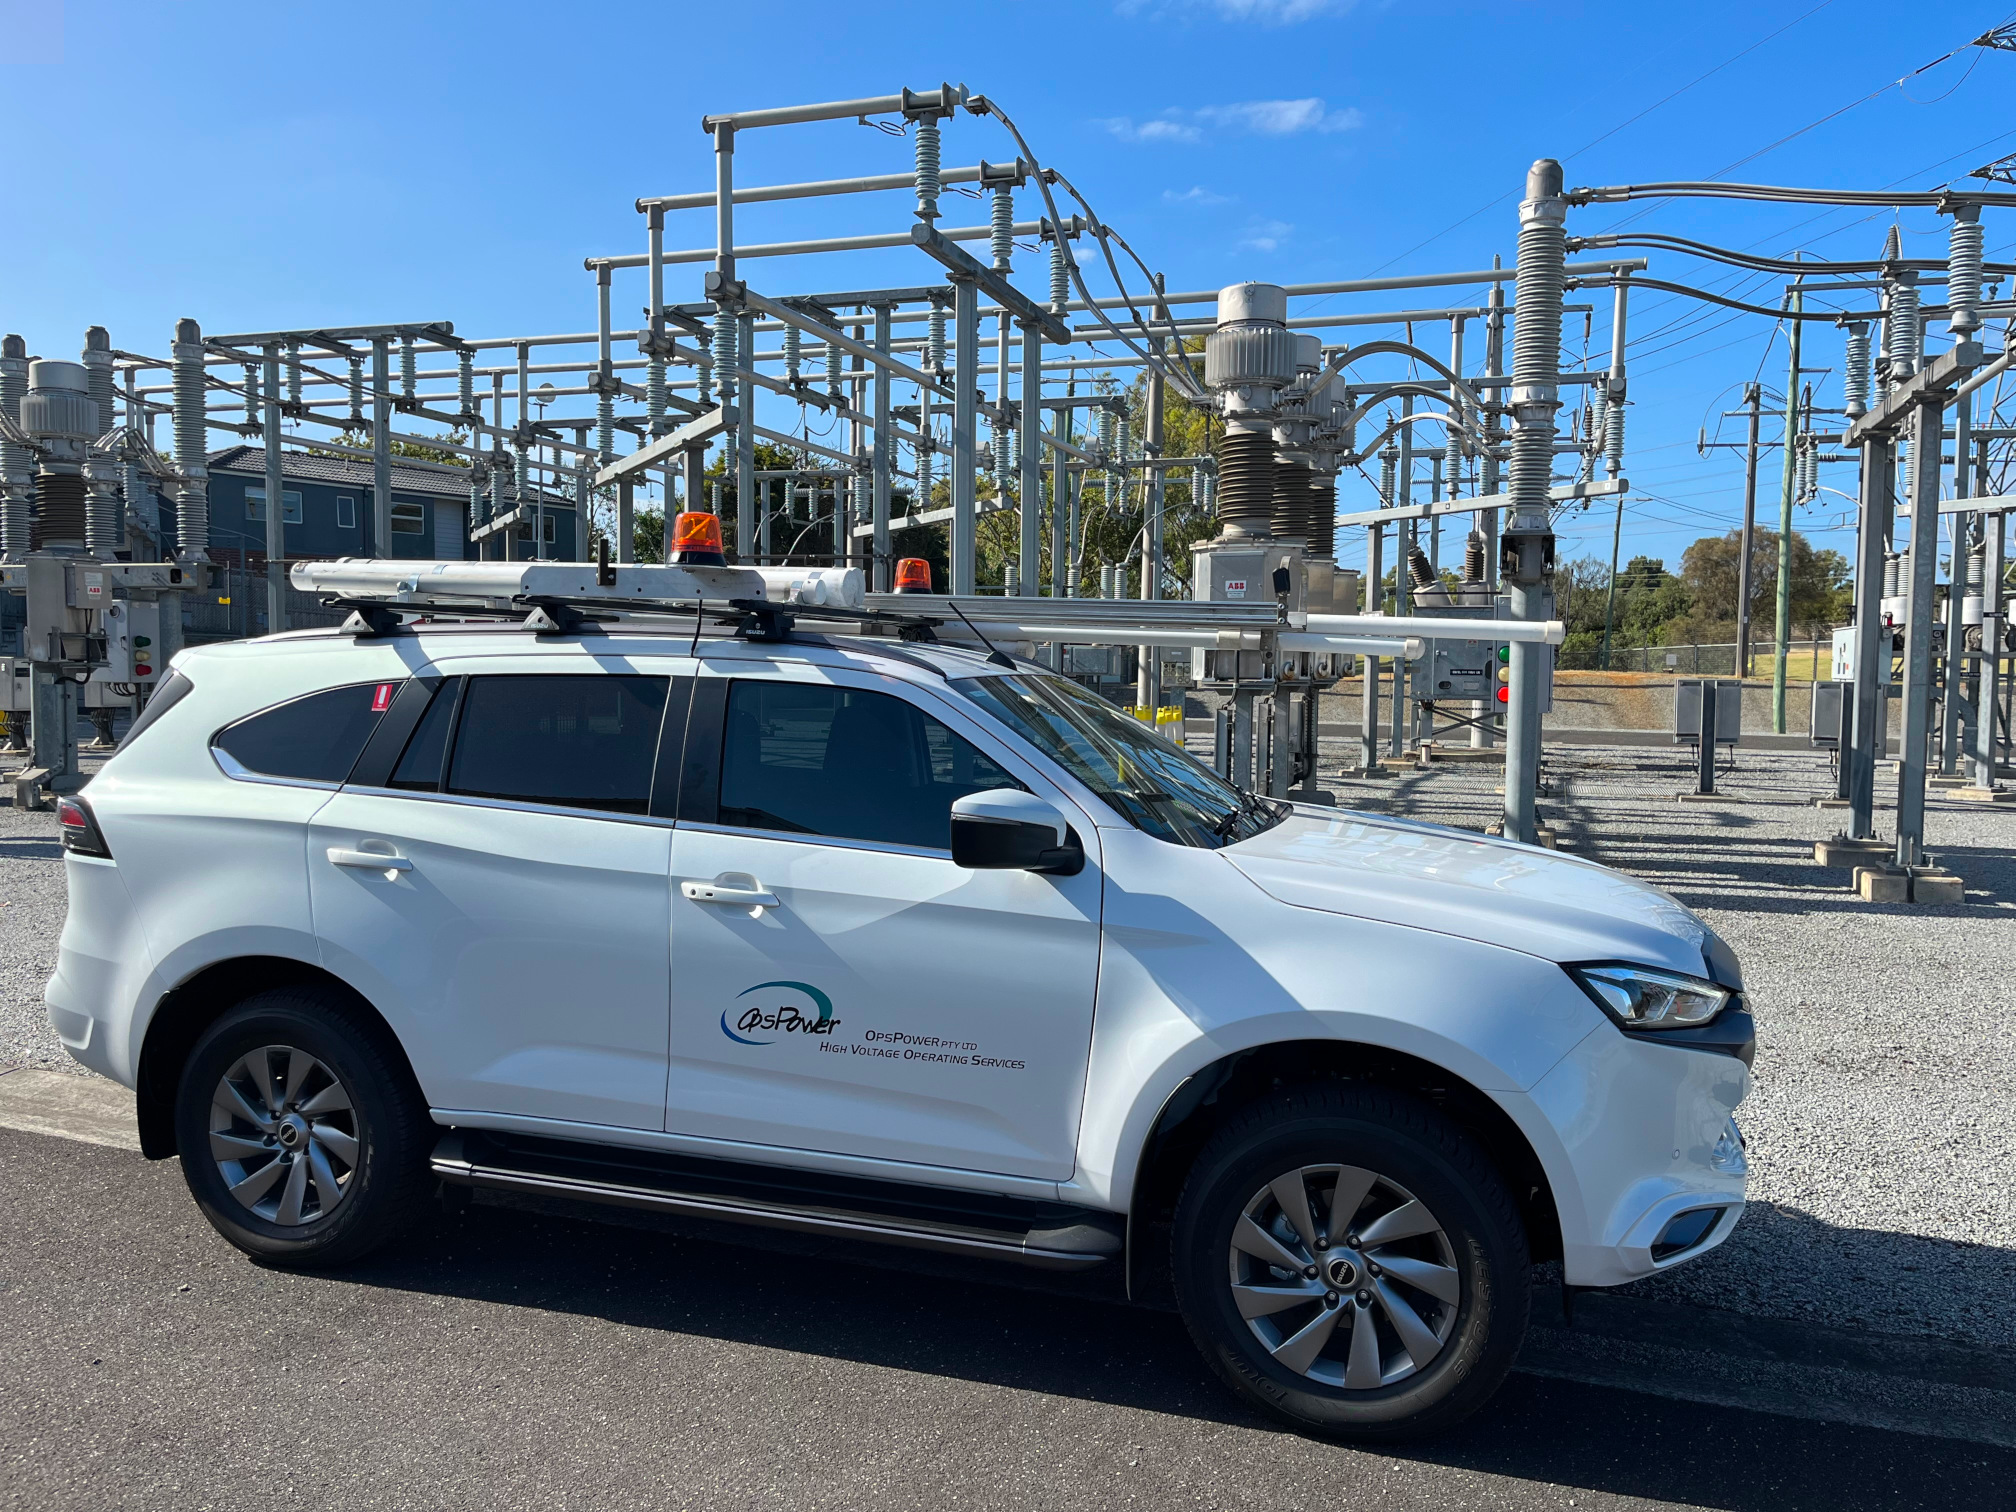 High voltage operator at an electricity zone substation for an upgrade in Melbourne, Australia